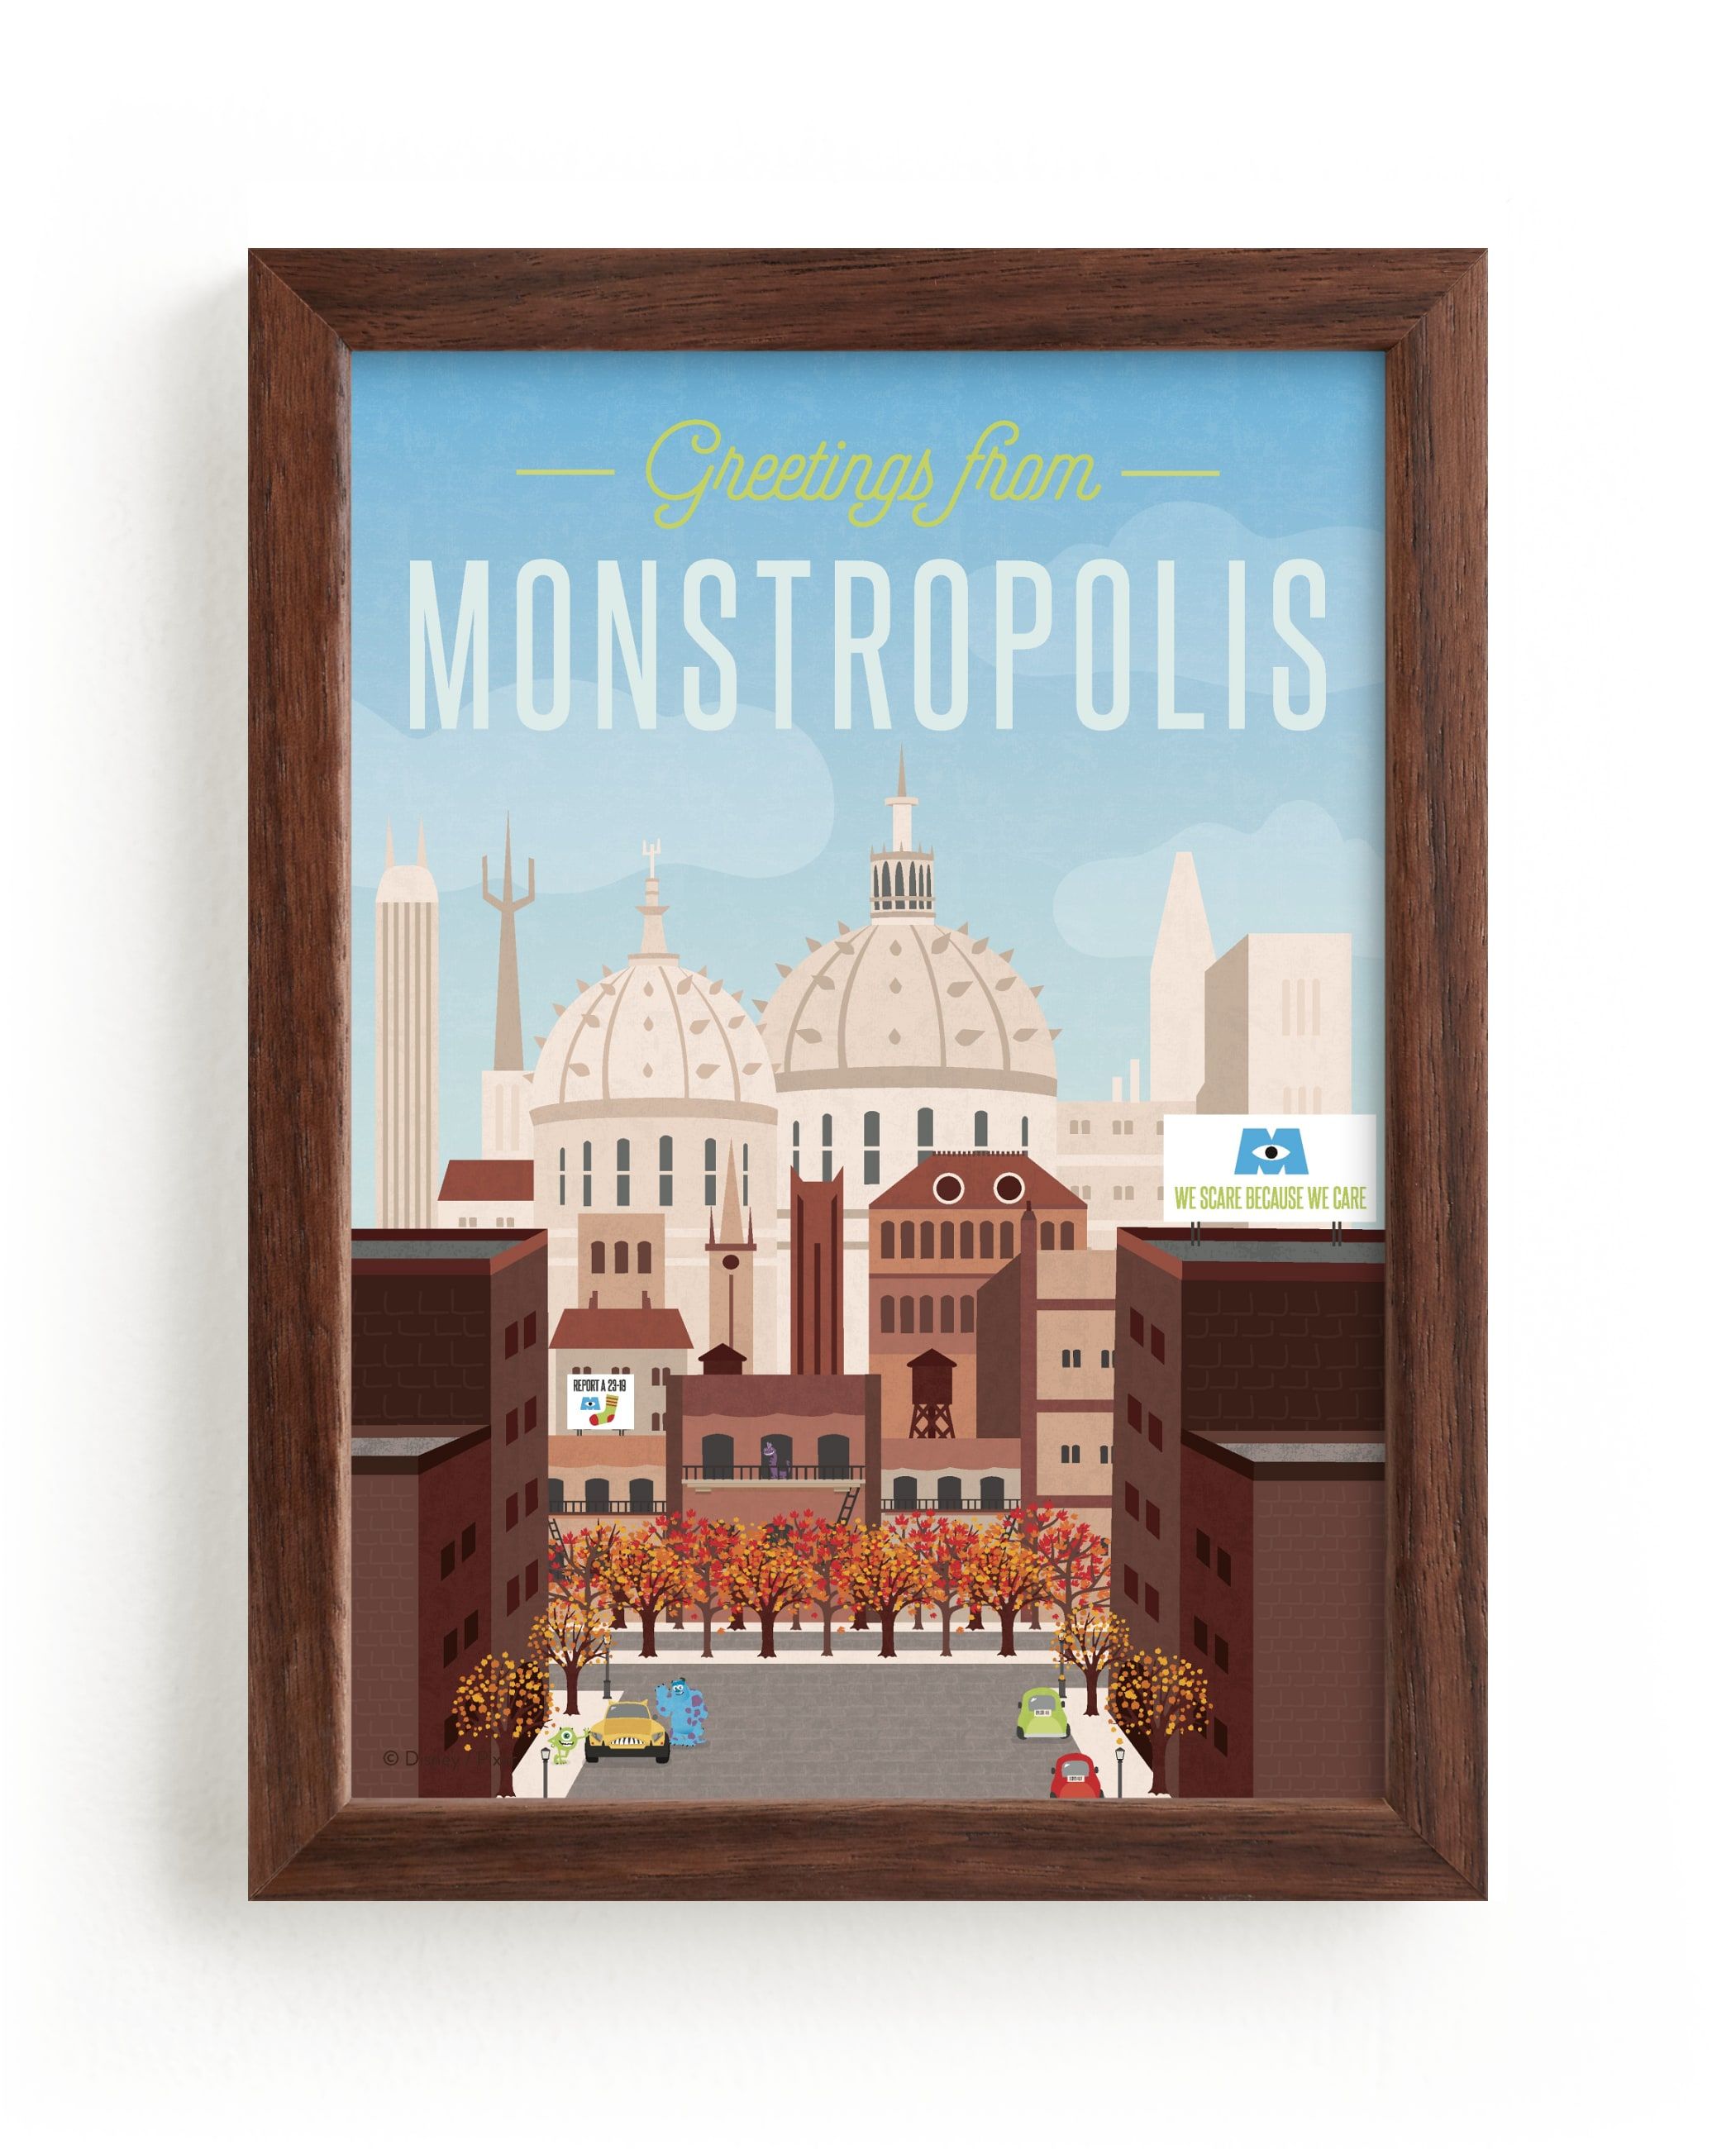 "Monstropolis | Monster's Inc" - Graphic Limited Edition Art Print by Erica Krystek. | Minted